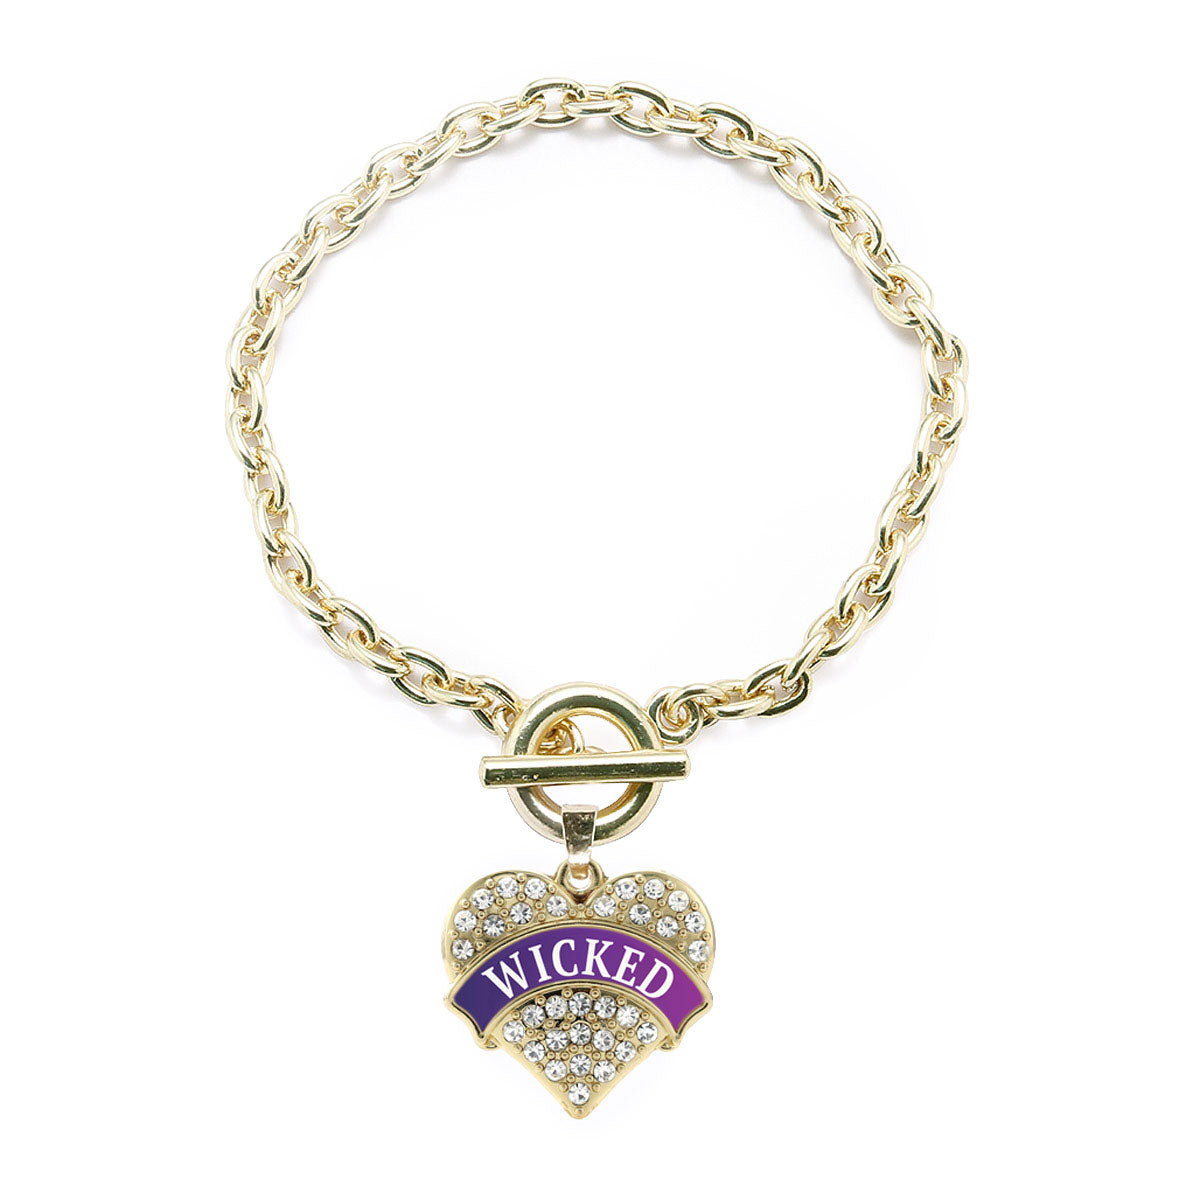 Gold Wicked Pave Heart Charm Toggle Bracelet